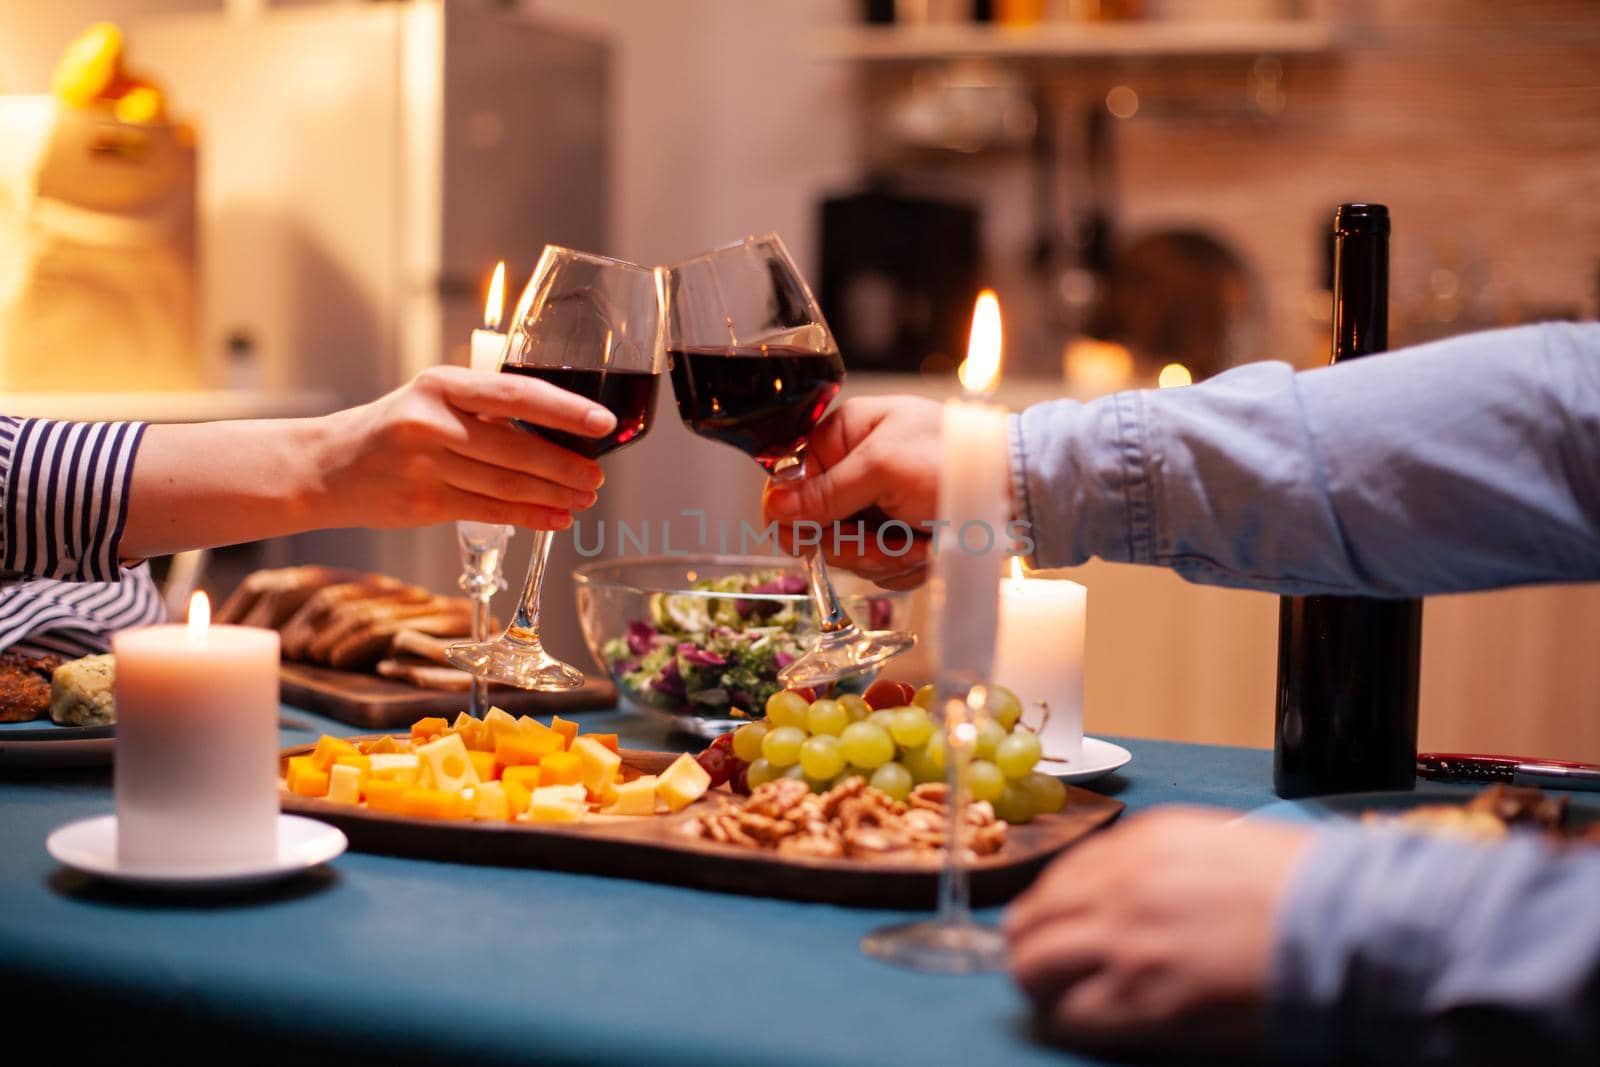 Couple holding glasses with red wine during romantic relationshiop celebration. Happy cheerful young couple dining together in the cozy kitchen, enjoying the meal, celebrating anniversary romantic toast.